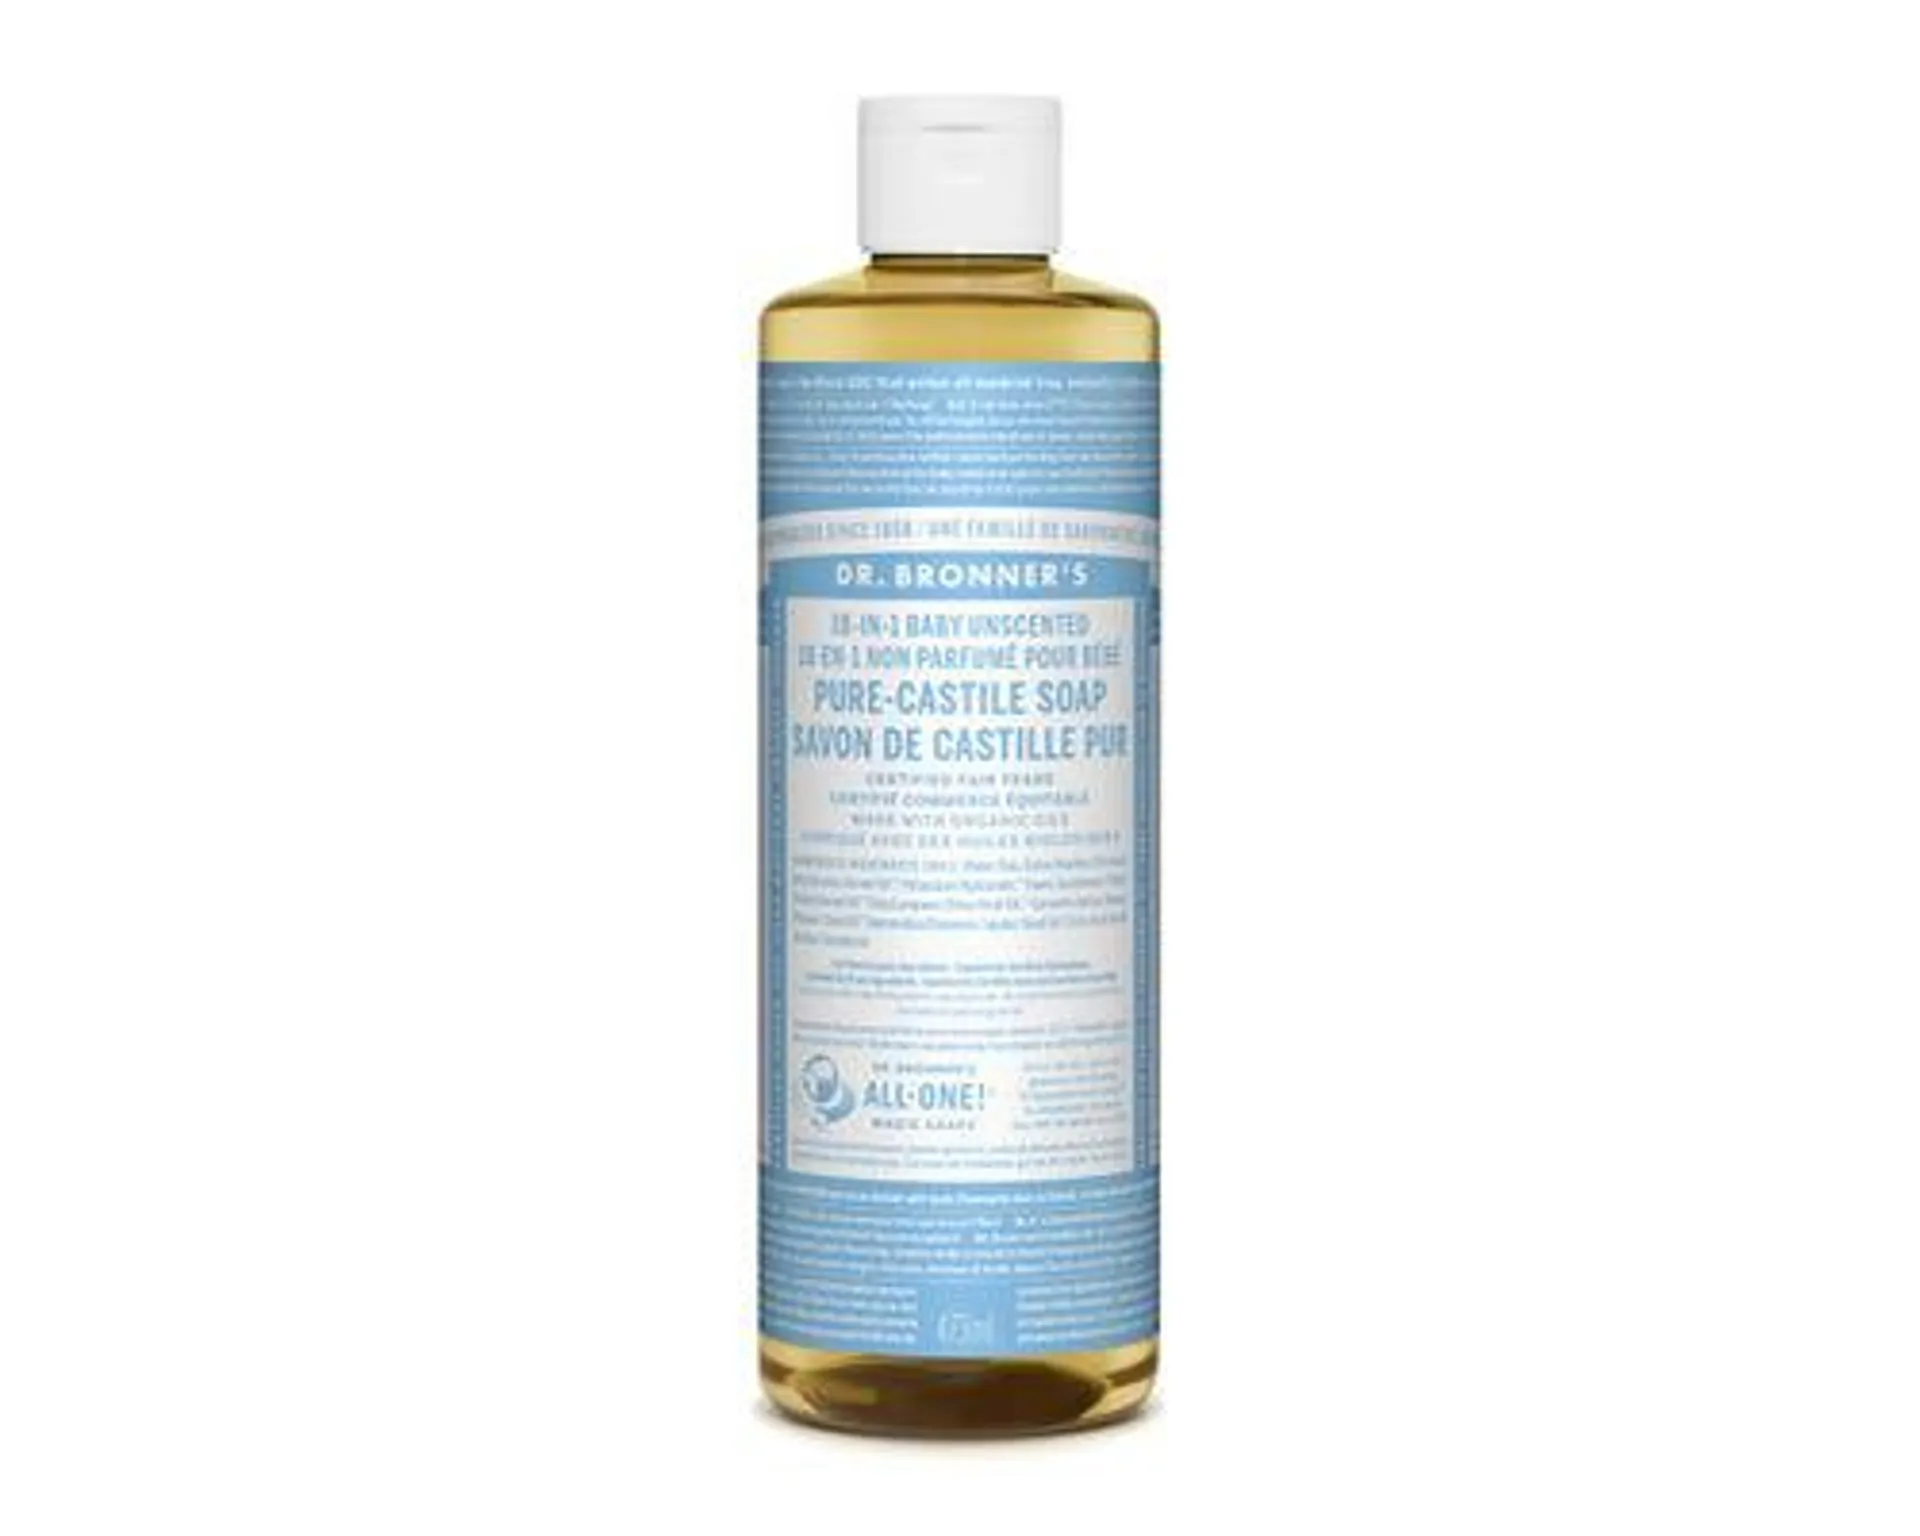 Dr. Bronner's 18-In-1 Pure-Castile Liquid Soap Baby Unscented 473mL